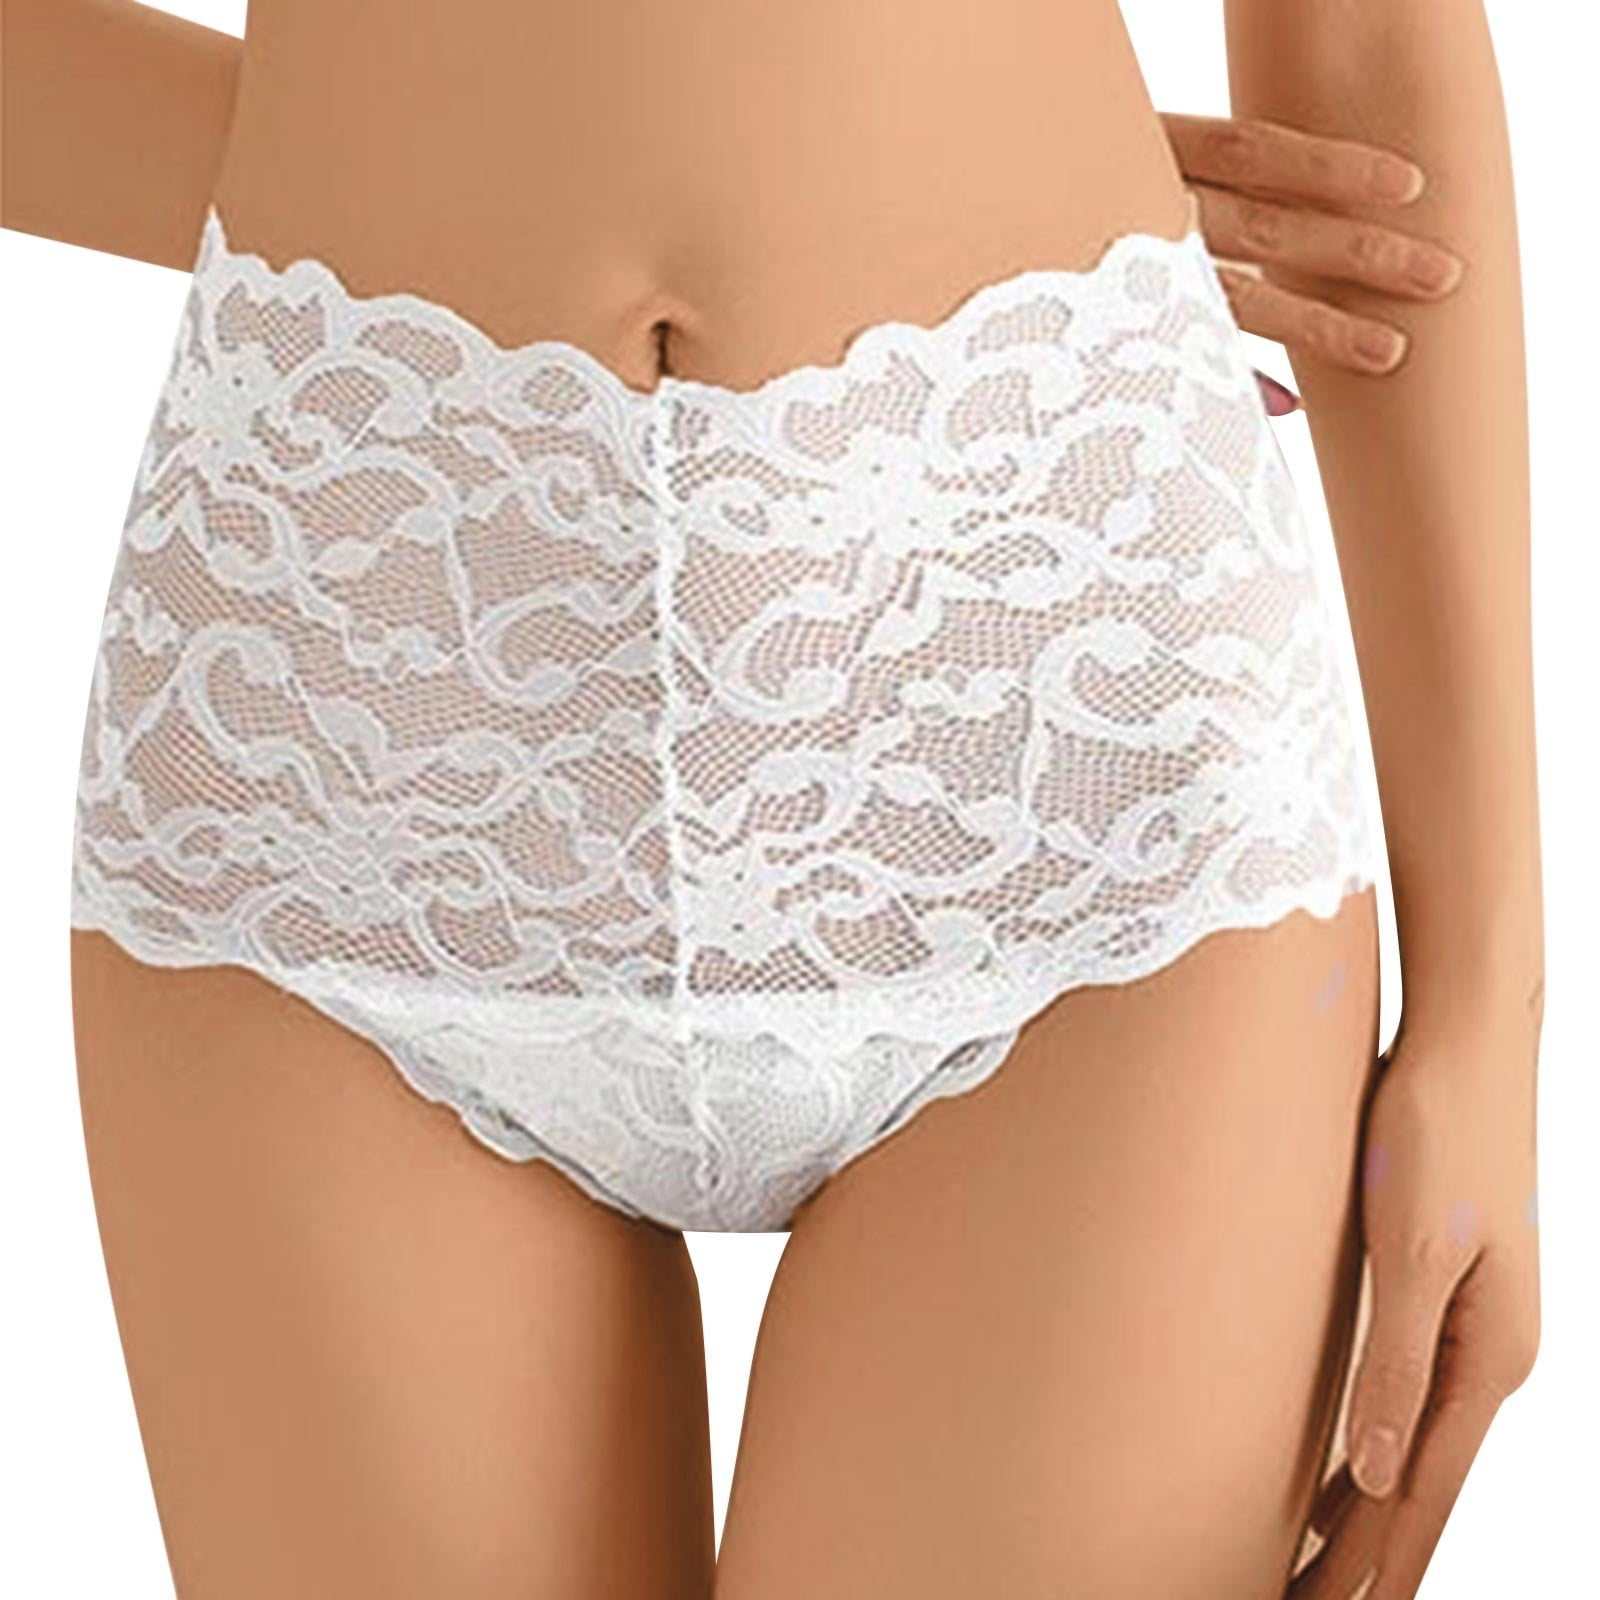 PMUYBHF Underwear Women Cotton No Show Women's Casual Solid Color High  Waisted Tight Lace Underwear Women Underwear Boyshorts 